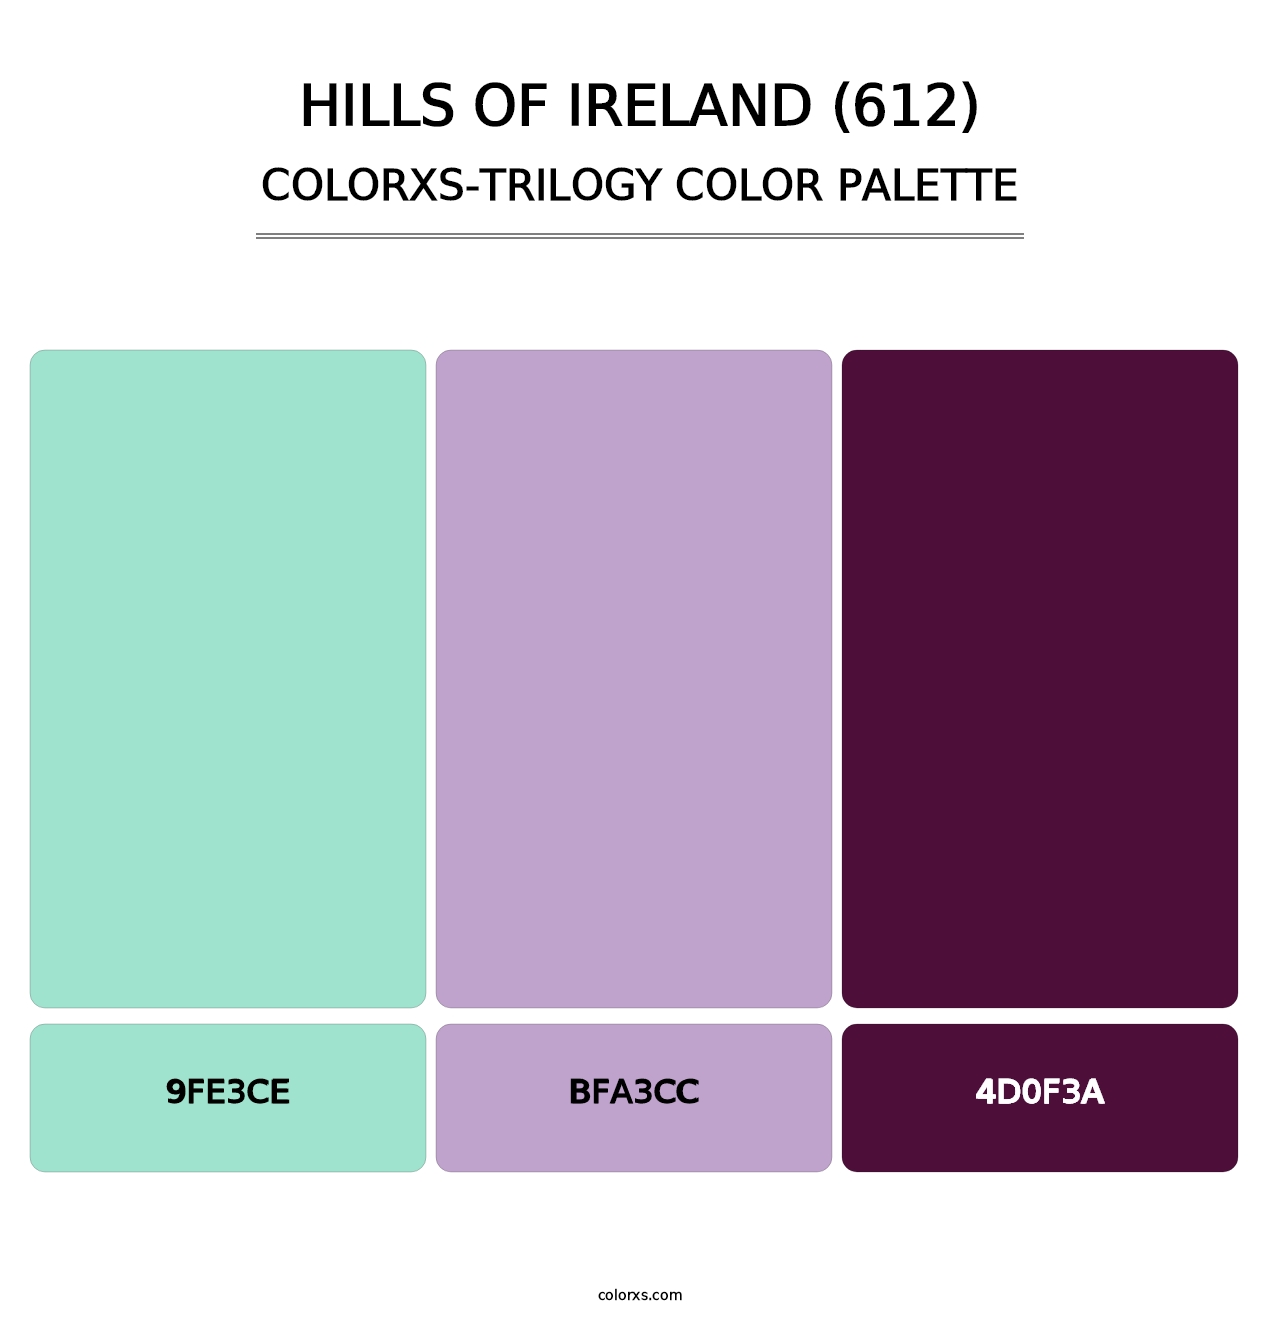 Hills of Ireland (612) - Colorxs Trilogy Palette